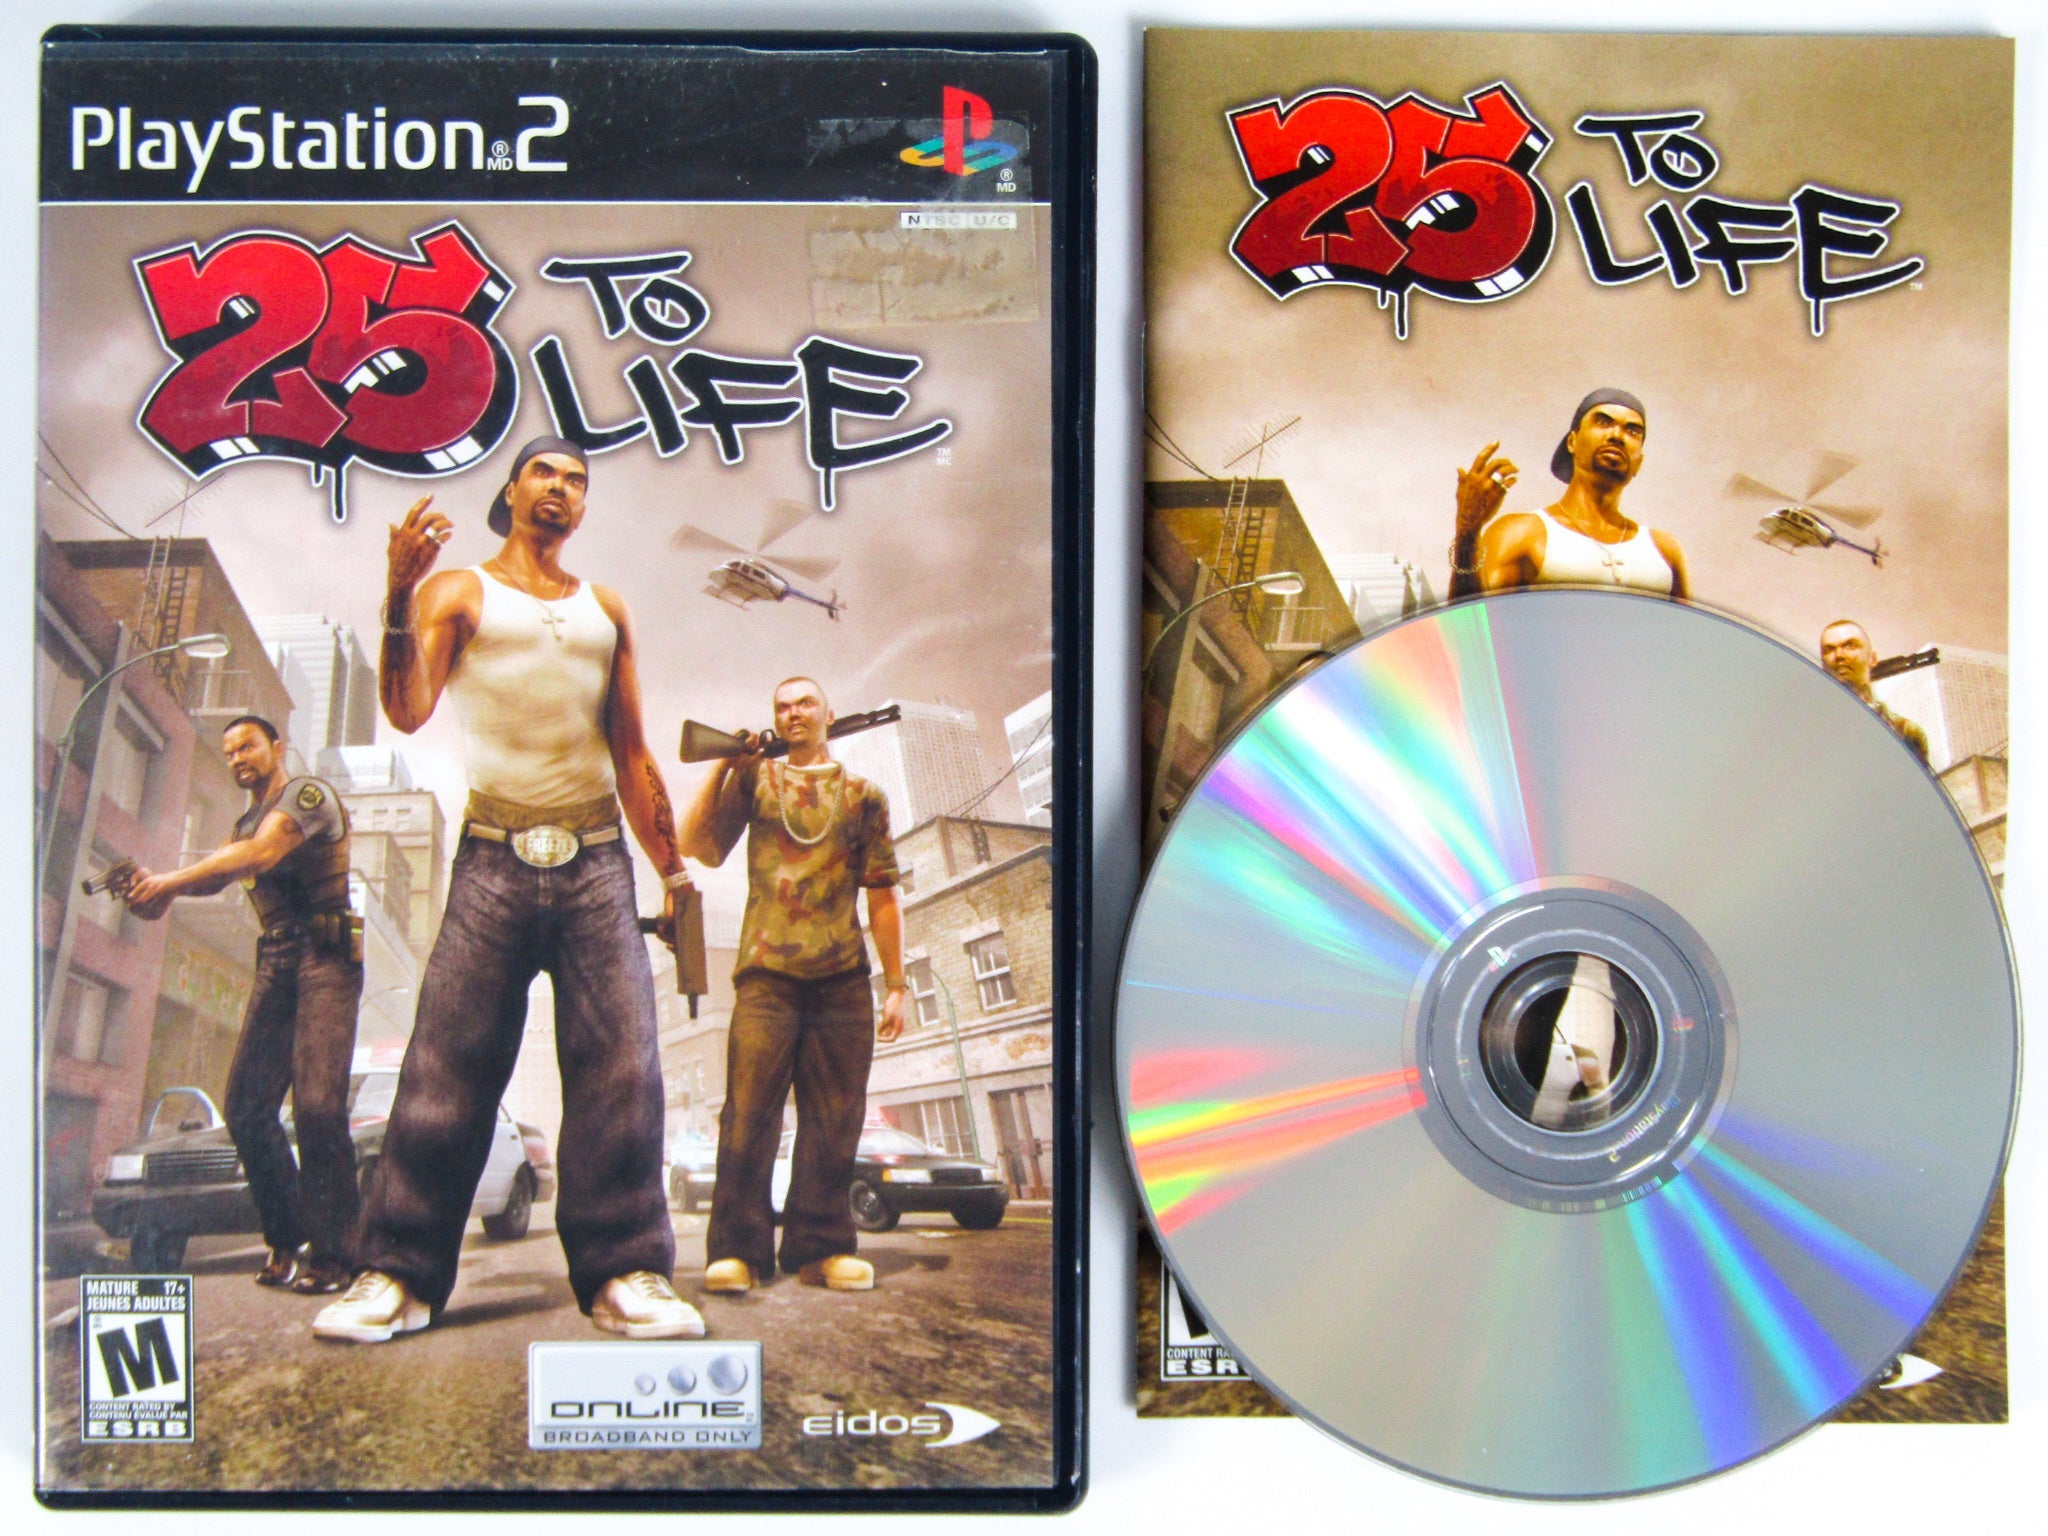 25 to Life - PlayStation 2 PS2 - Used - Disc Only - PNP Games Online Store